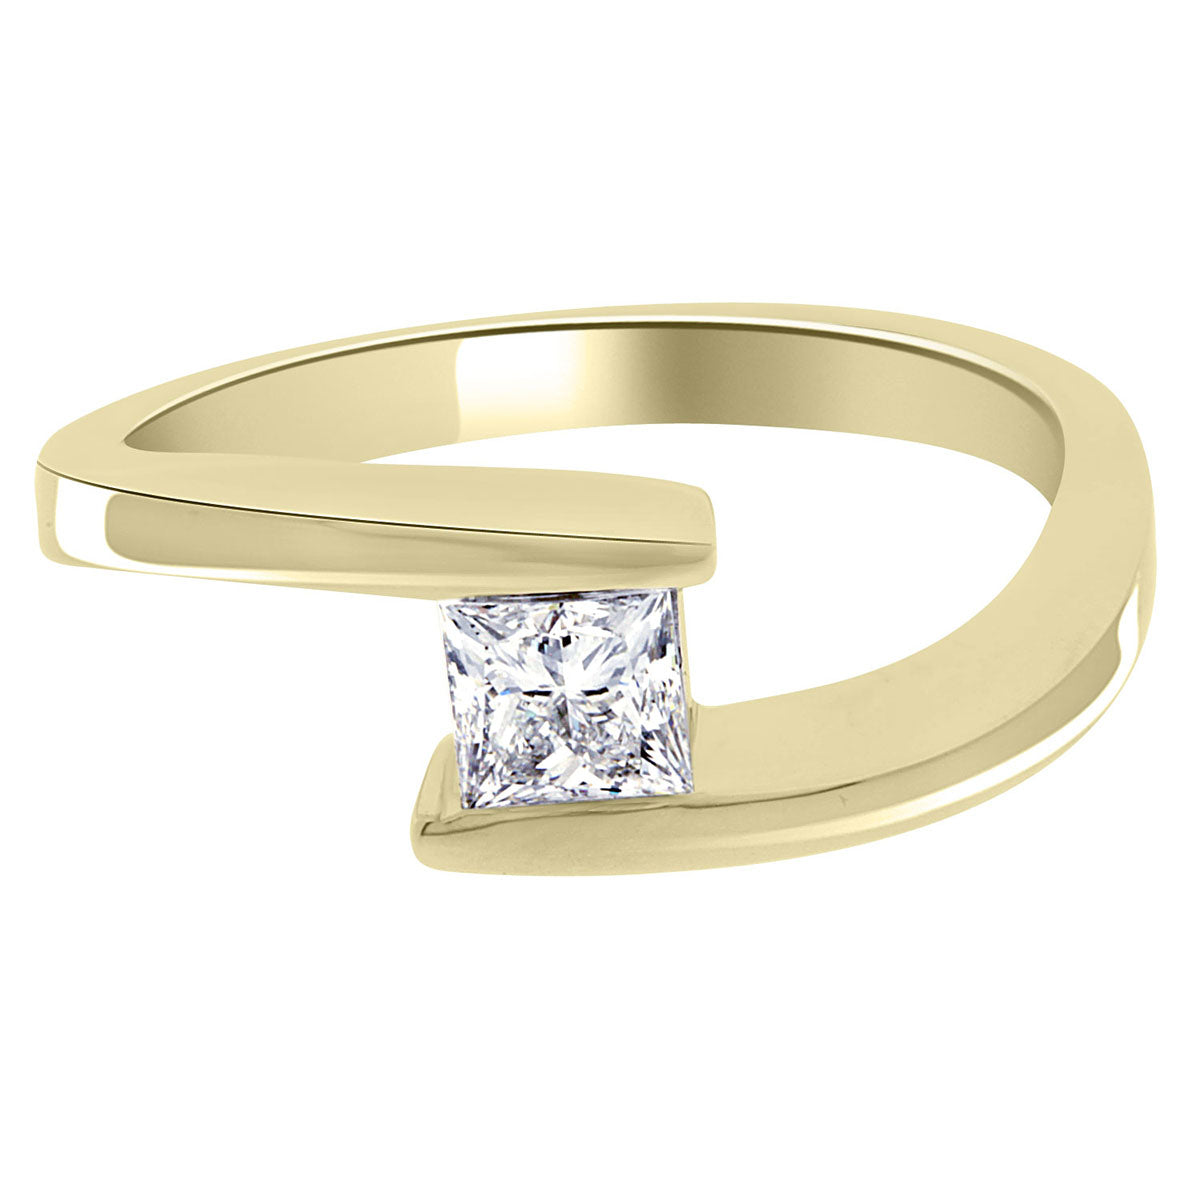 Princess Solitaire Engagement Ring made from yellow gold